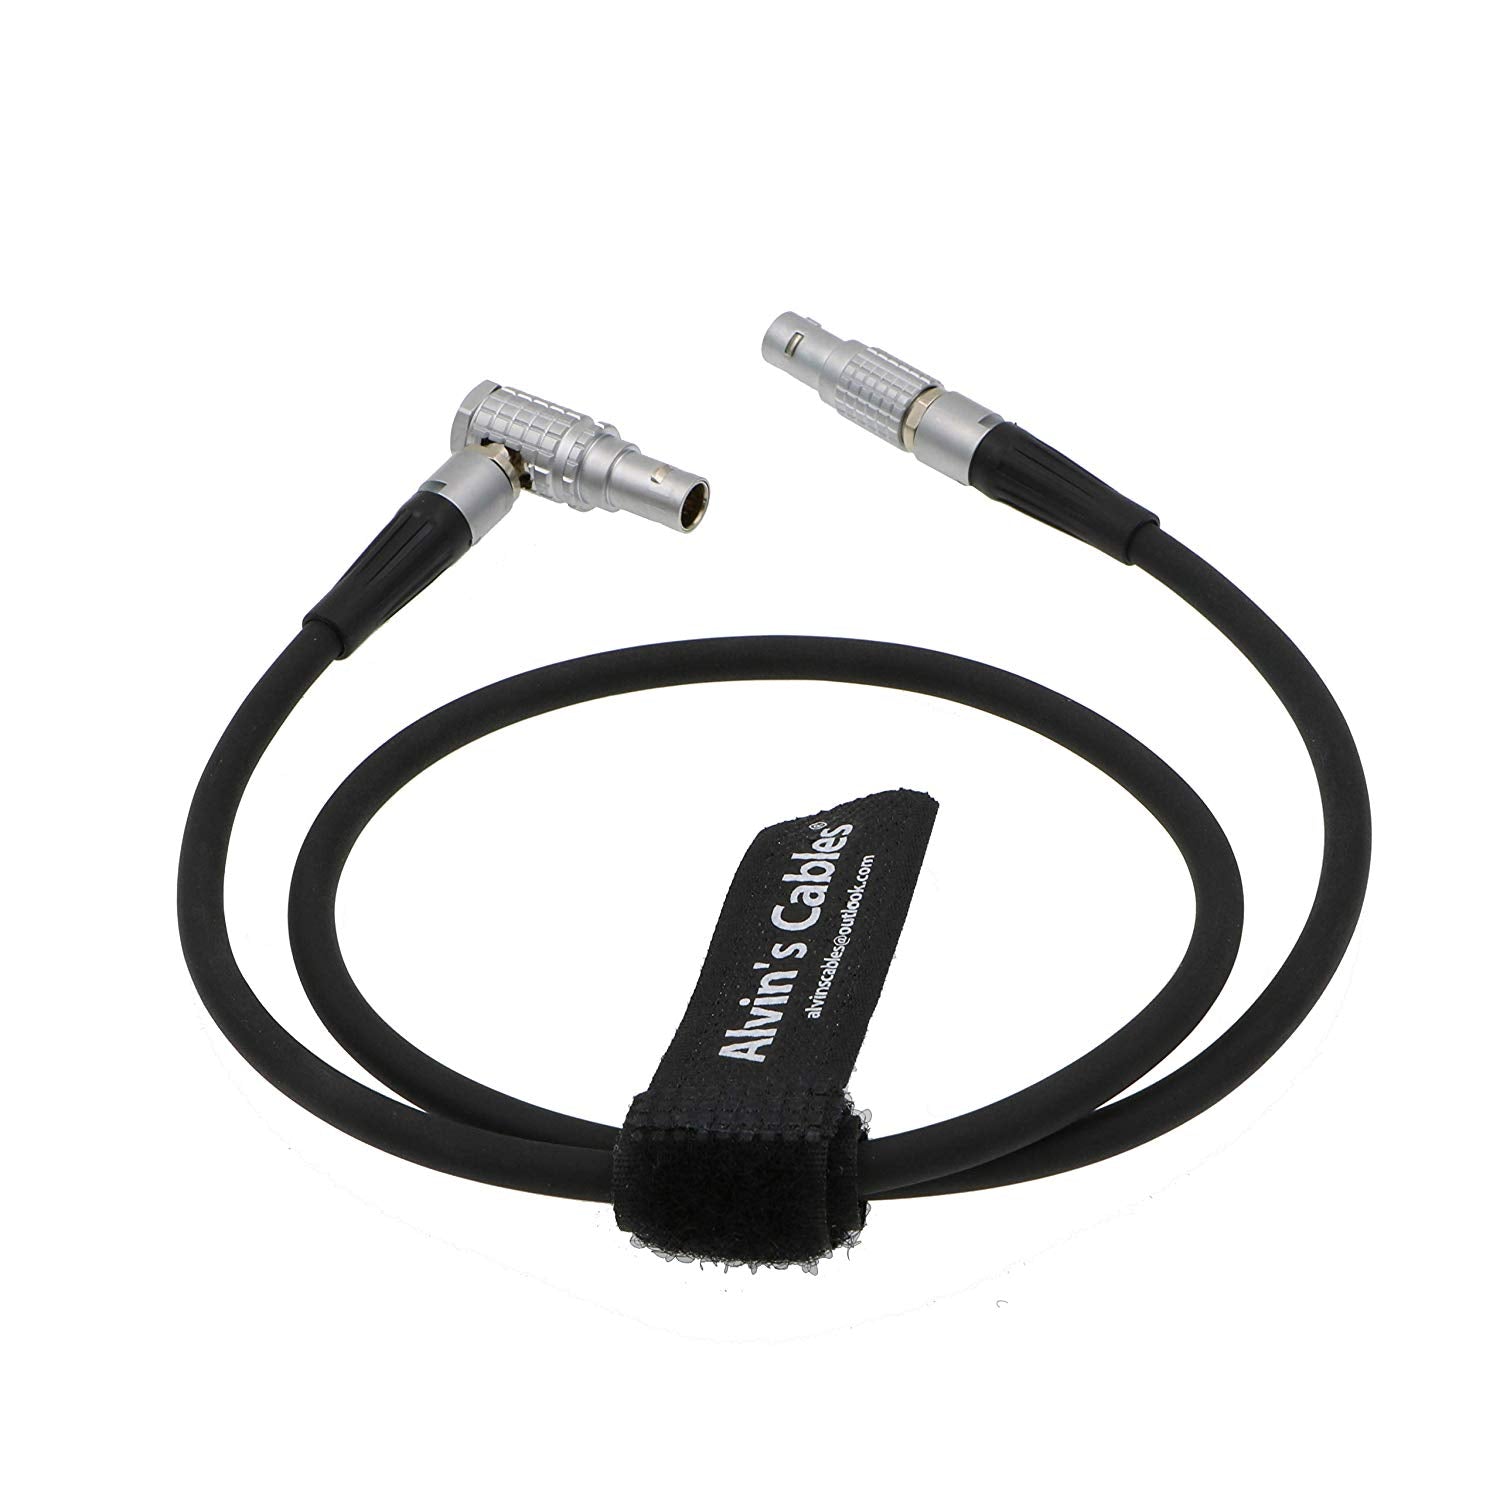 Alvin's Cables Nucleus M 7 Pin to 7 Pin Male Motor Connection Cable Right Angle to Straight 60CM